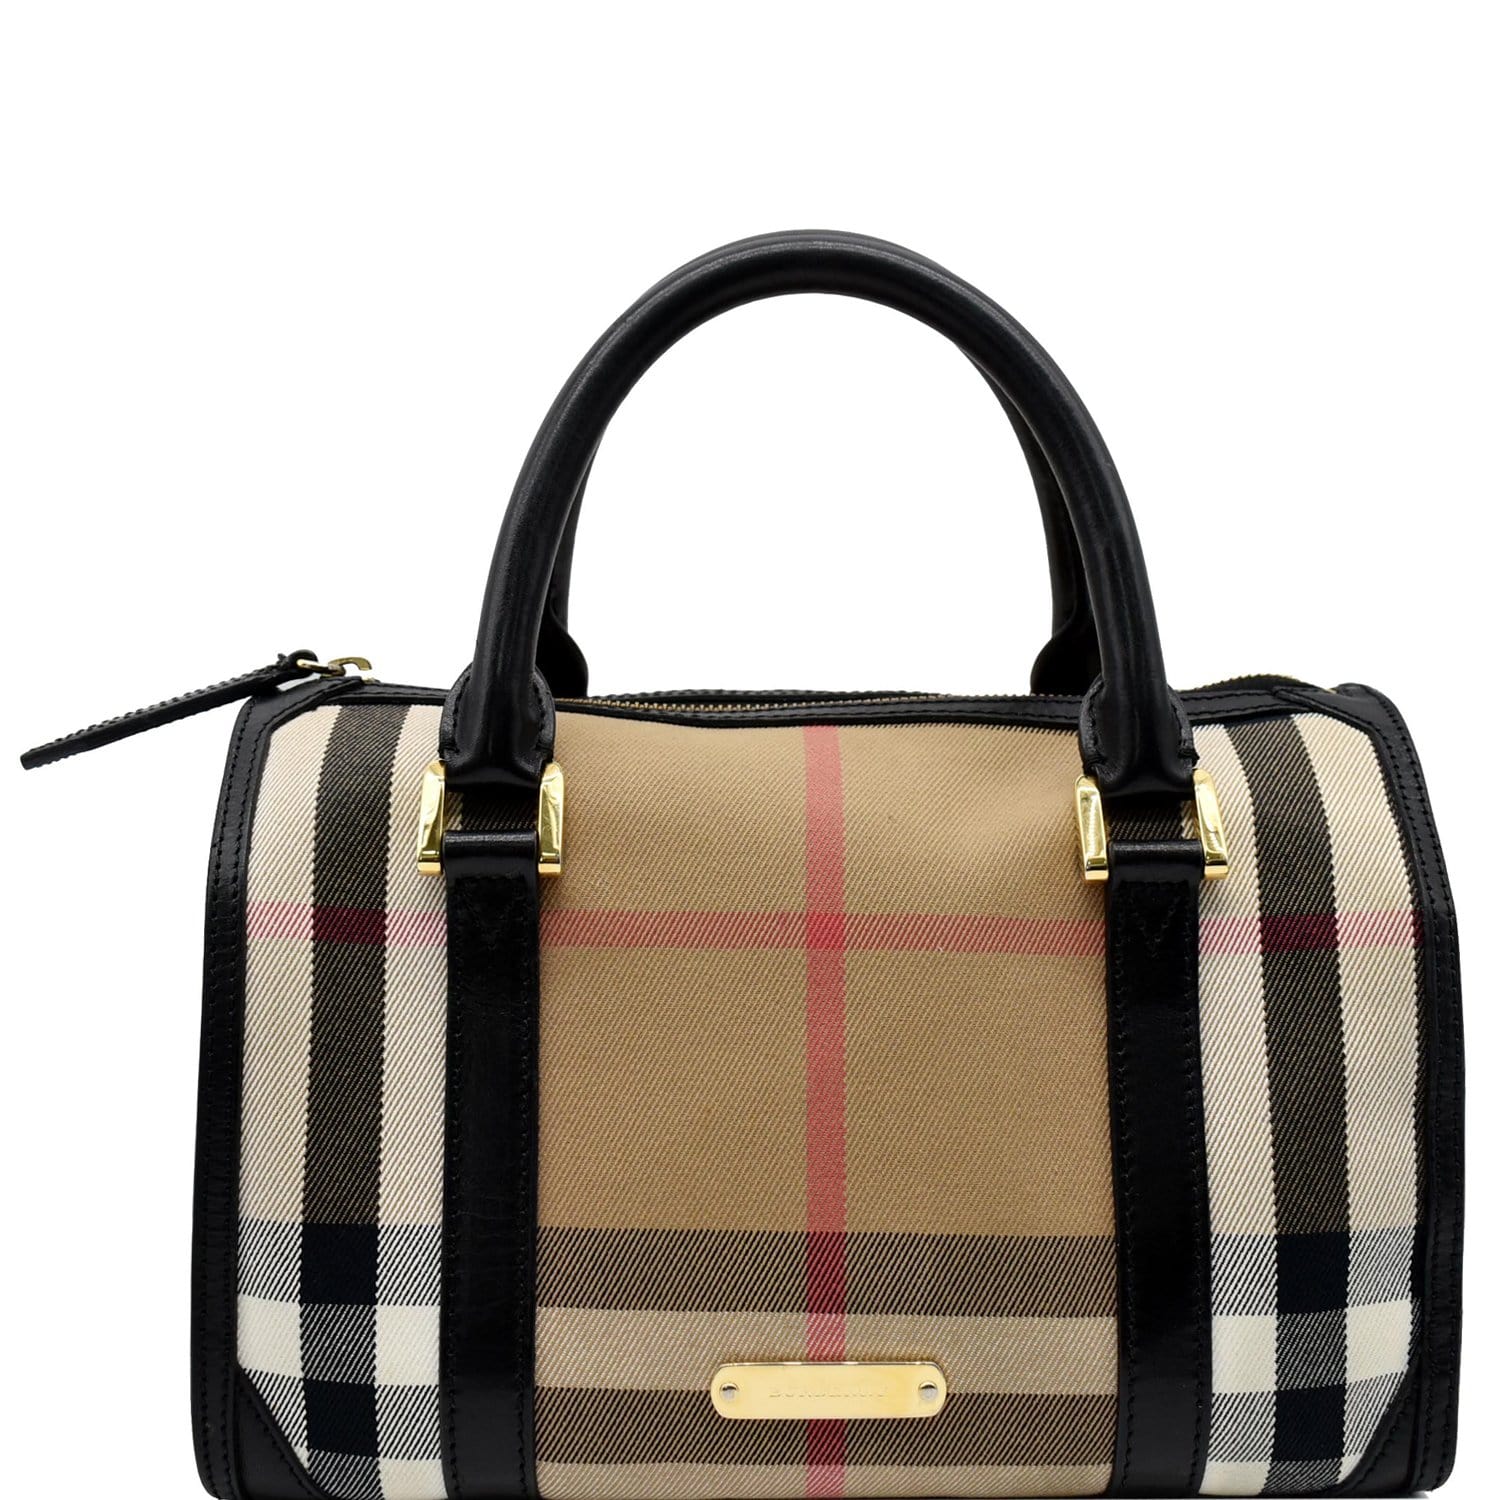 Preloved BURBERRY Haymarket Check Coated Canvas Medium Chester